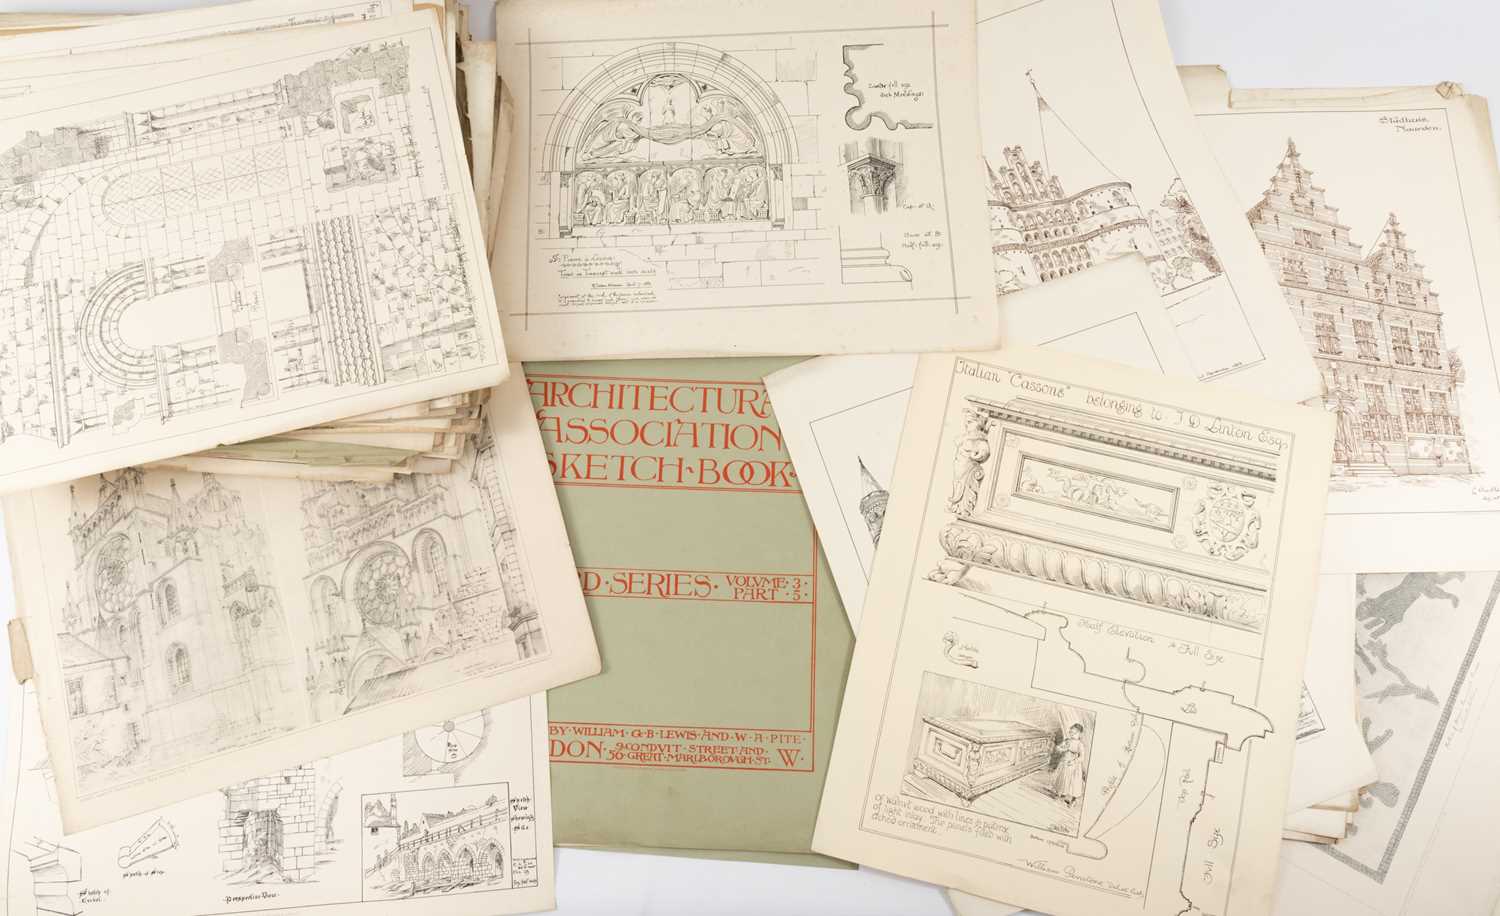 ARCHITECTURAL ASSOCIATION SKETCH BOOK FOLIO - extensive collection of loose prints with